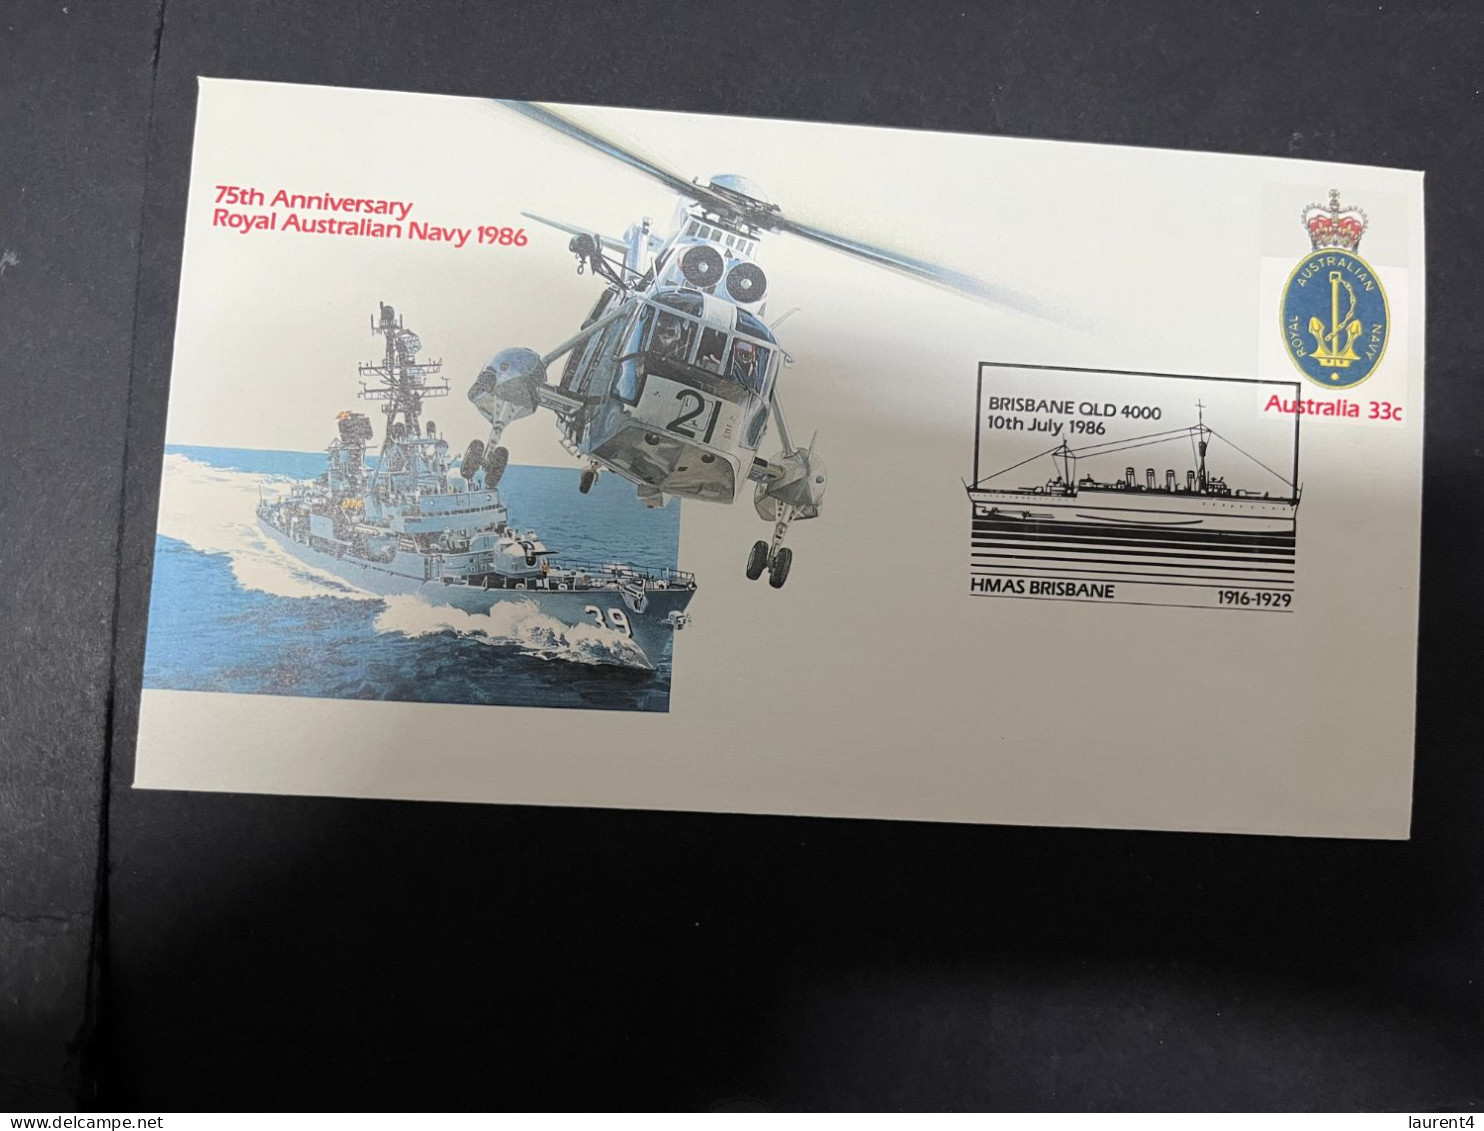 13-4-2024 (1 X 49) Australia - 1986 - 75th Anniversary Of The Royal Australian Navy (part 1 - 4 Covers) - Premiers Jours (FDC)